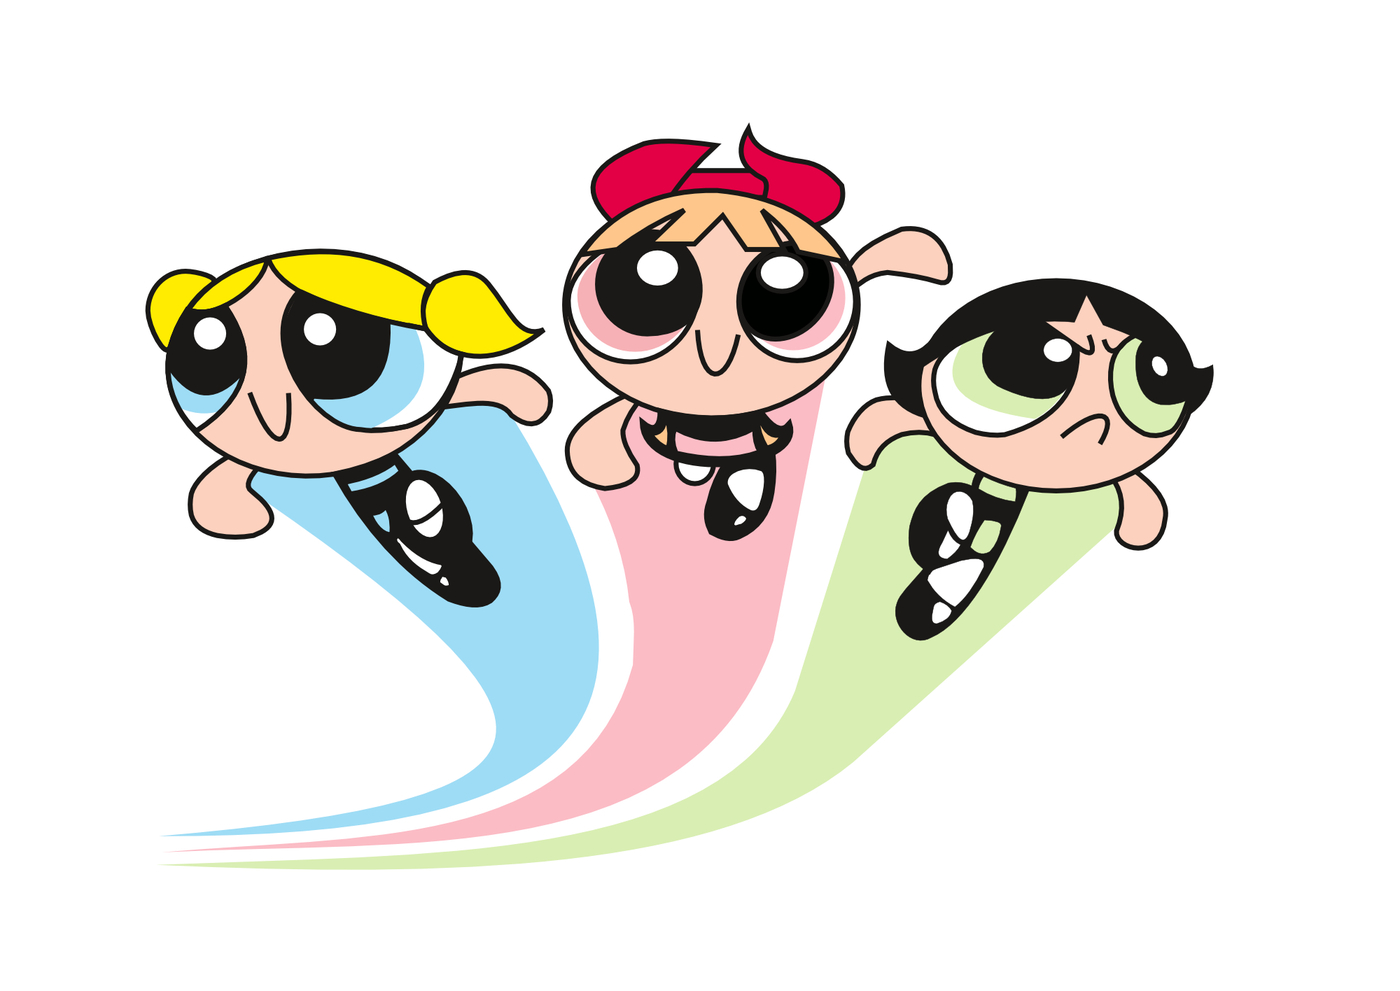 Powerpuff Girls
Drawn many years ago in Corel Draw, now revisited in Affinity Designer.
Keywords: Powerpuff Girls drawing svg